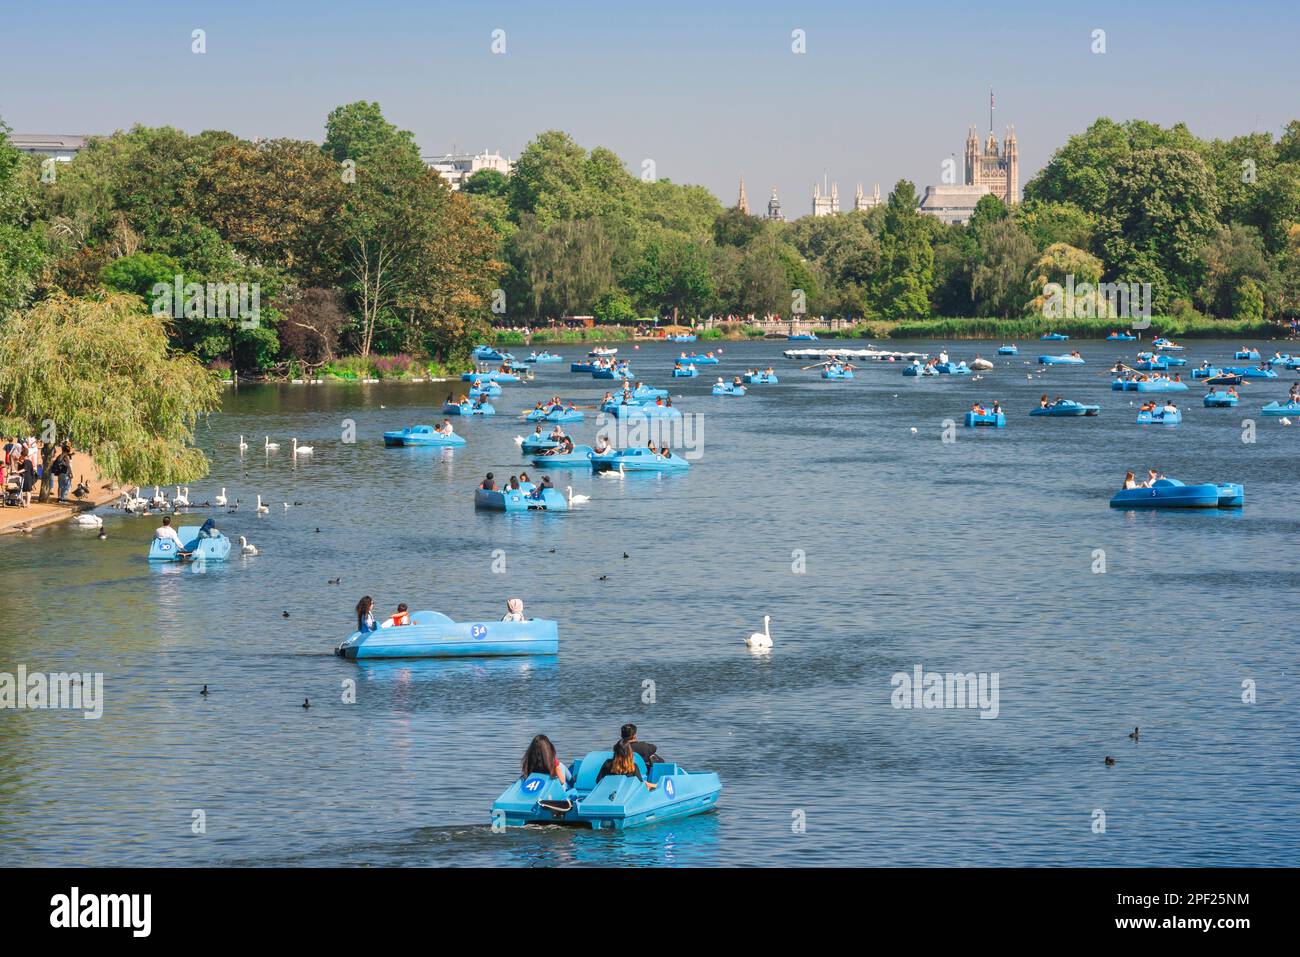 London holiday vacation UK, view in summer of people enjoying an afternoon on the boating lake in Hyde Park, London, UK Stock Photo